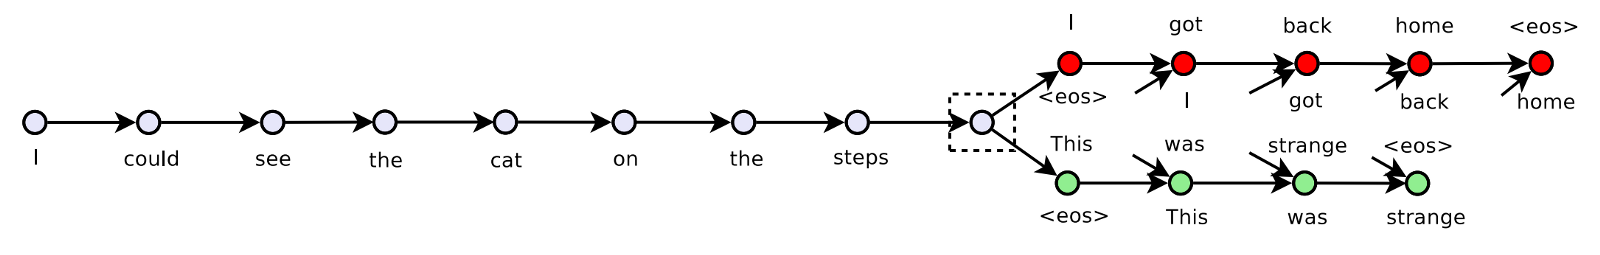 A diagram showing how a sentence is predicted by the sentence that follows and precedes it.